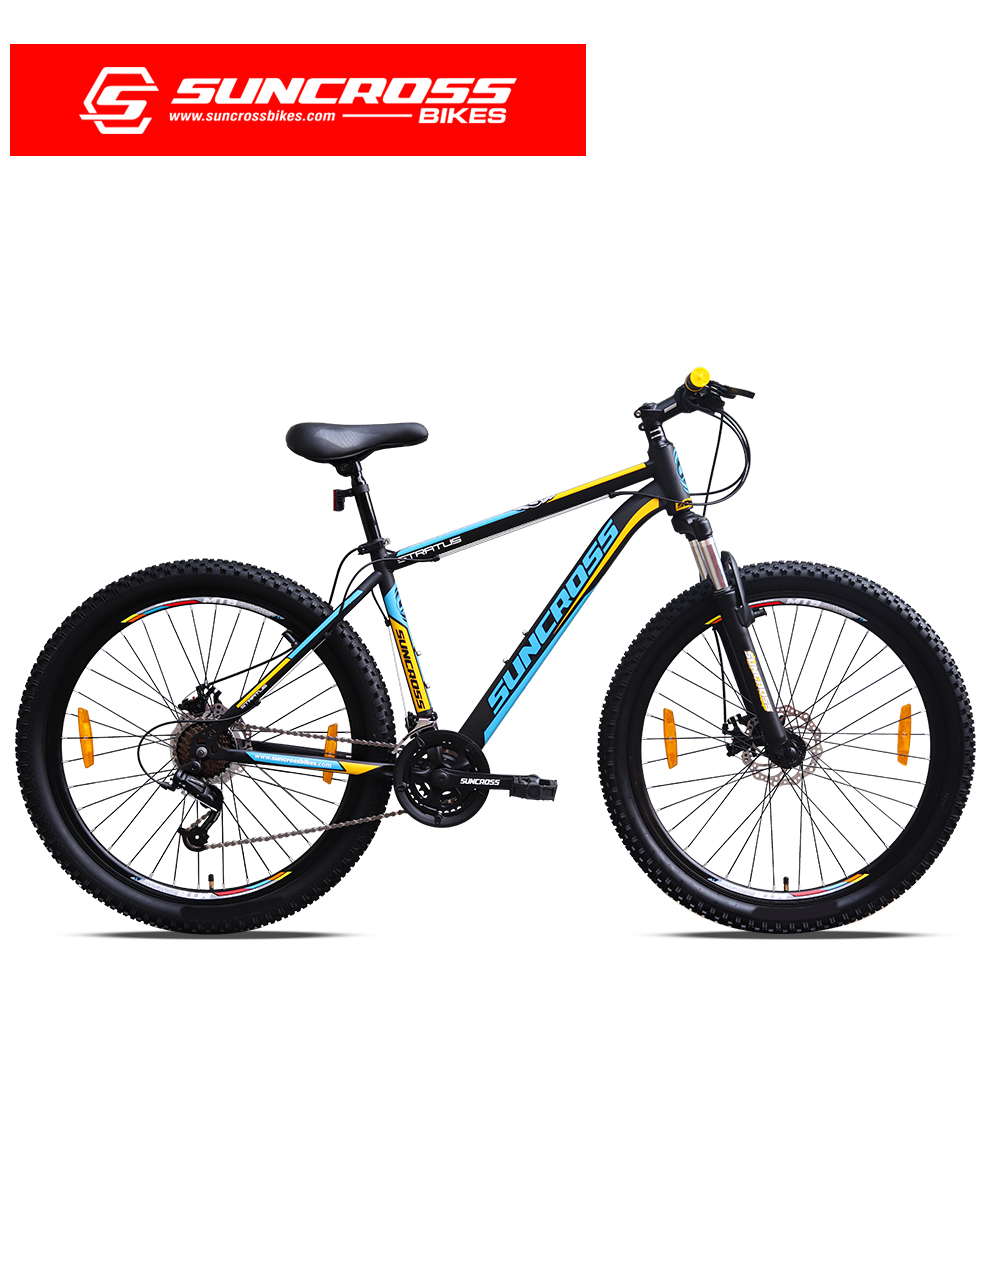 Suncross Brand Bicycles Shop Online E BIKE, MTB, ROAD, HYBRID Bikes, FAT and KIDS Cycles in India.